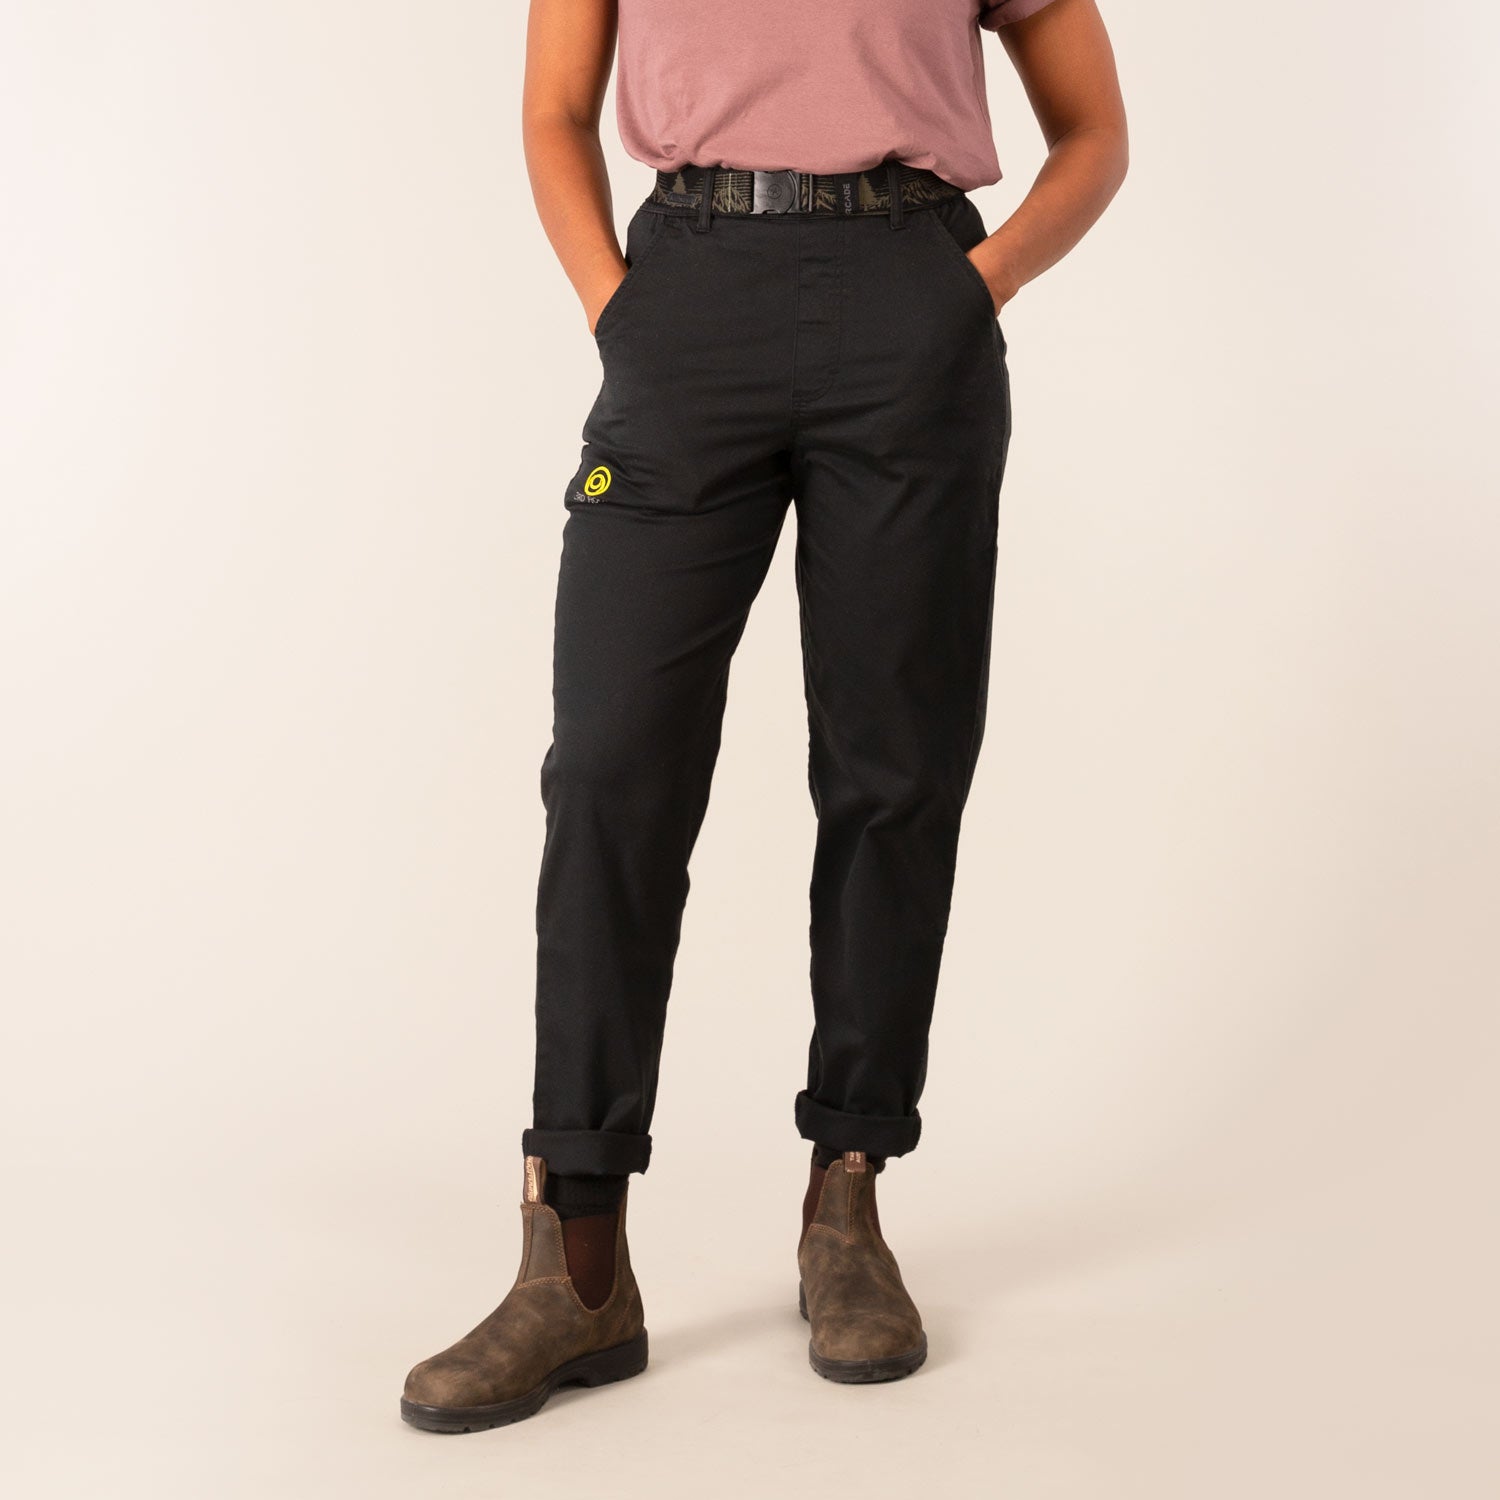 3RD ROCK Clothing LARK Trousers - Kendal is 5ft 7" with a 28" waist, 38" hips and wears 30/RL. F